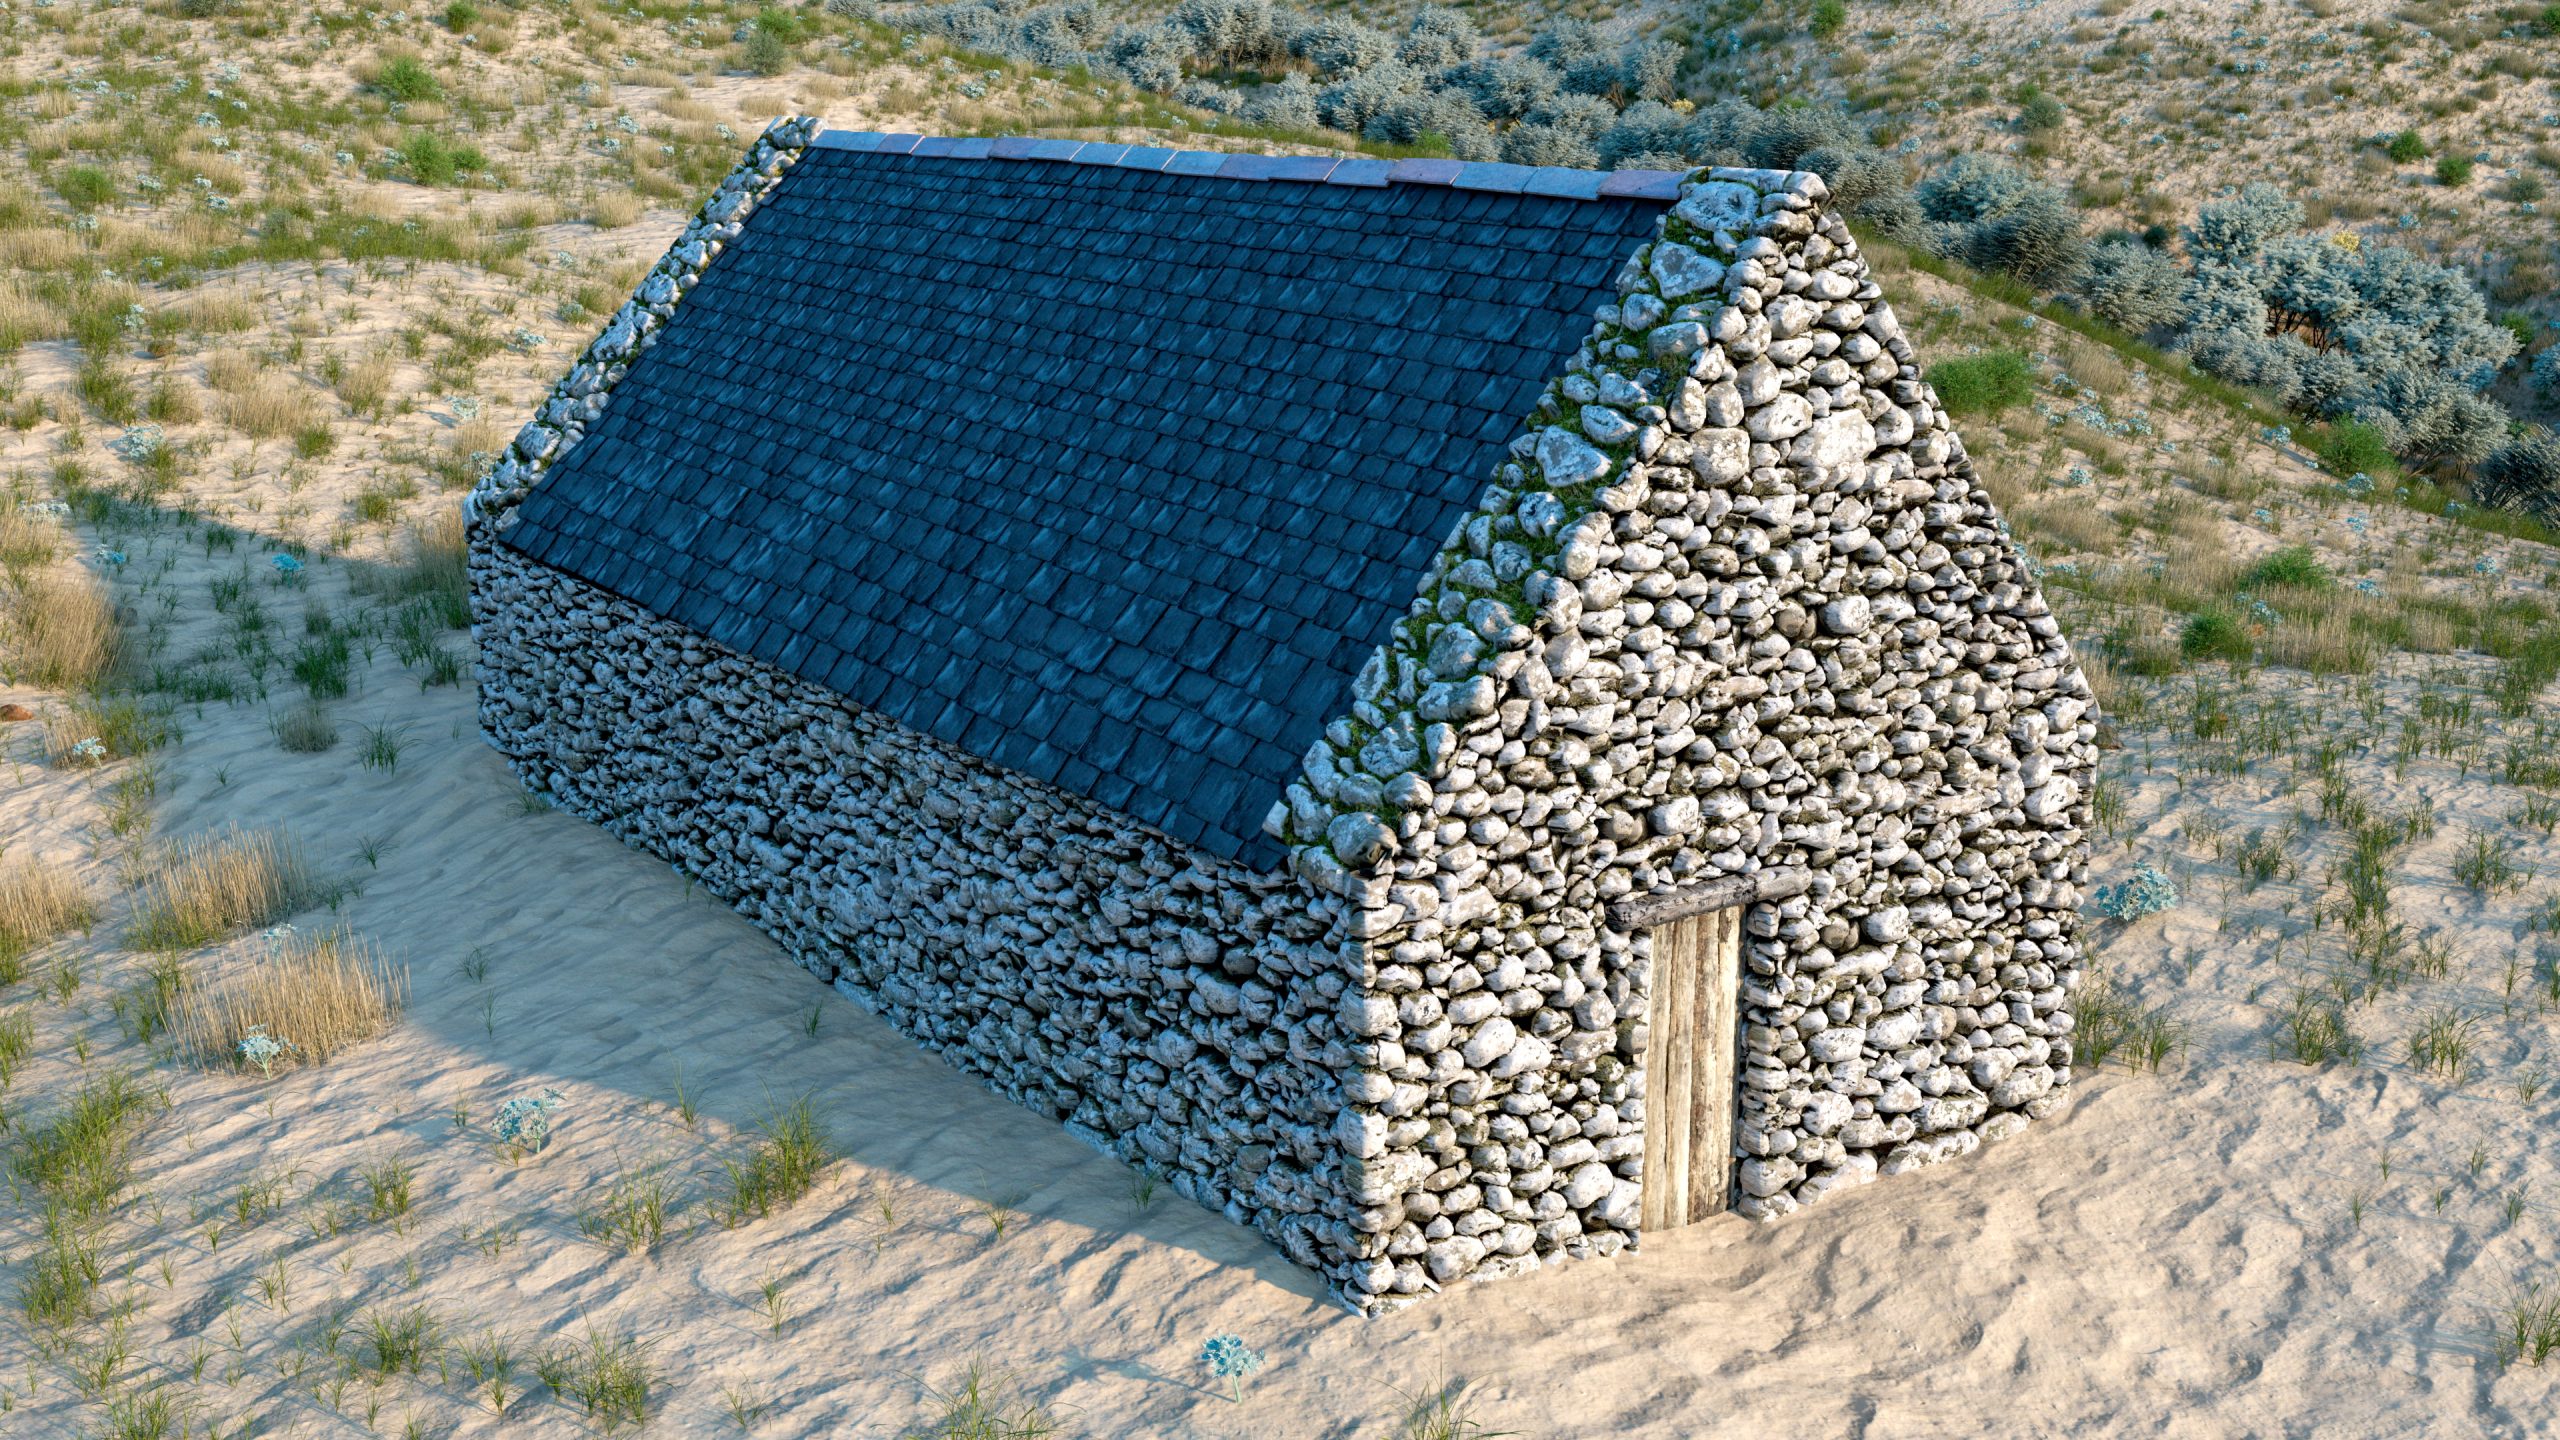 Computer generated reconstruction of a medieval stone chapel. Location depicted is St Patrick's Chapel, Whitesands, Pembrokeshire